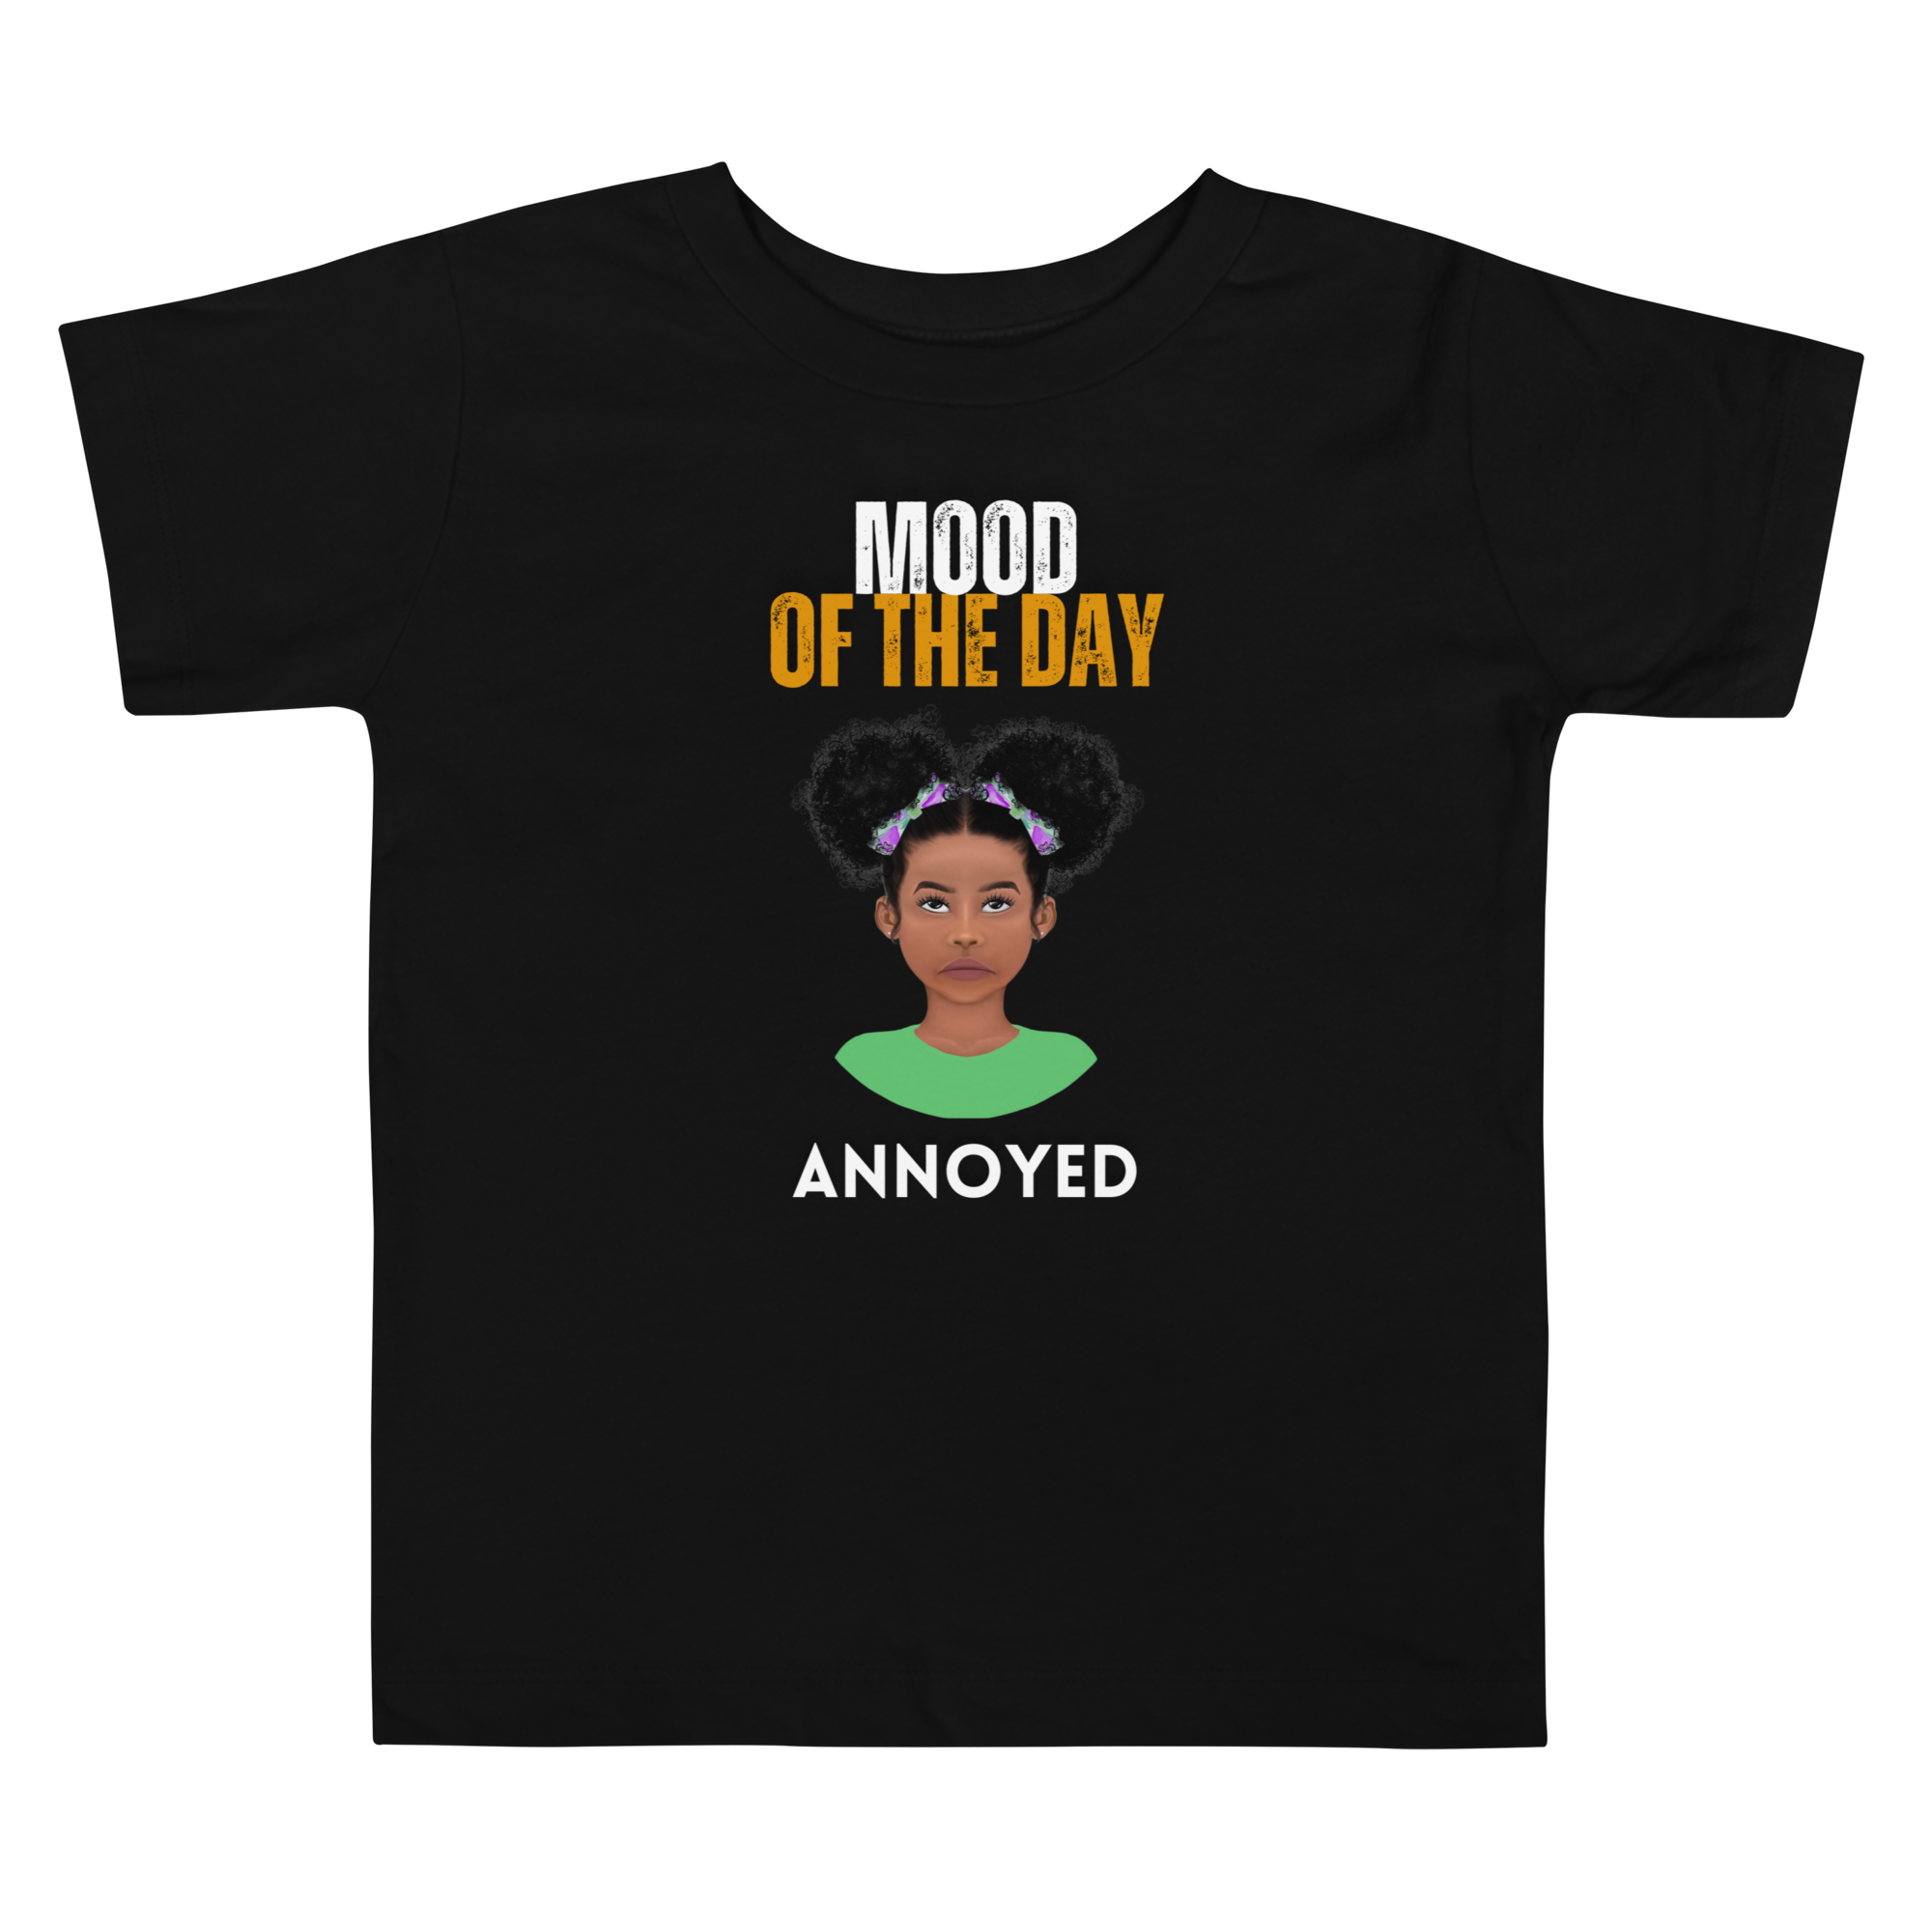 Toddler Mood of the Day T-shirt - Annoyed